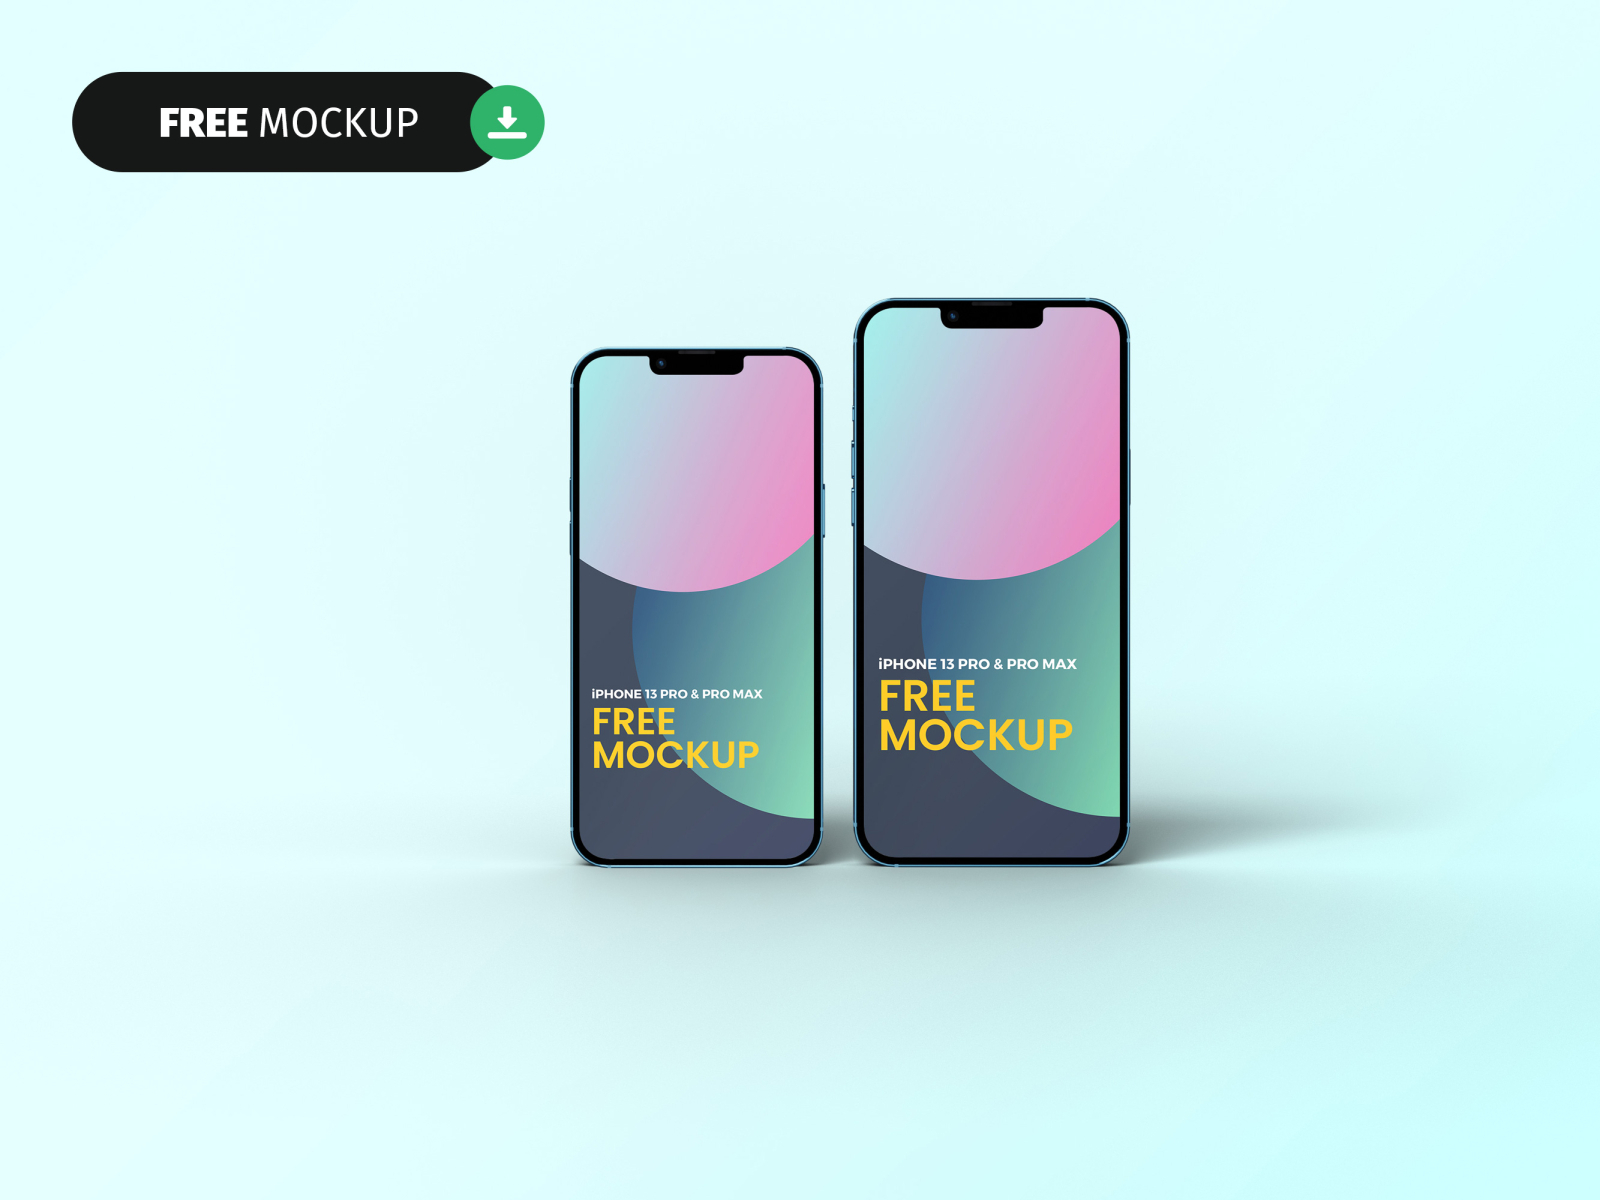 Free Iphone 13 Pro And Pro Max Mockup By Mehran Shahid Chowdhury On 